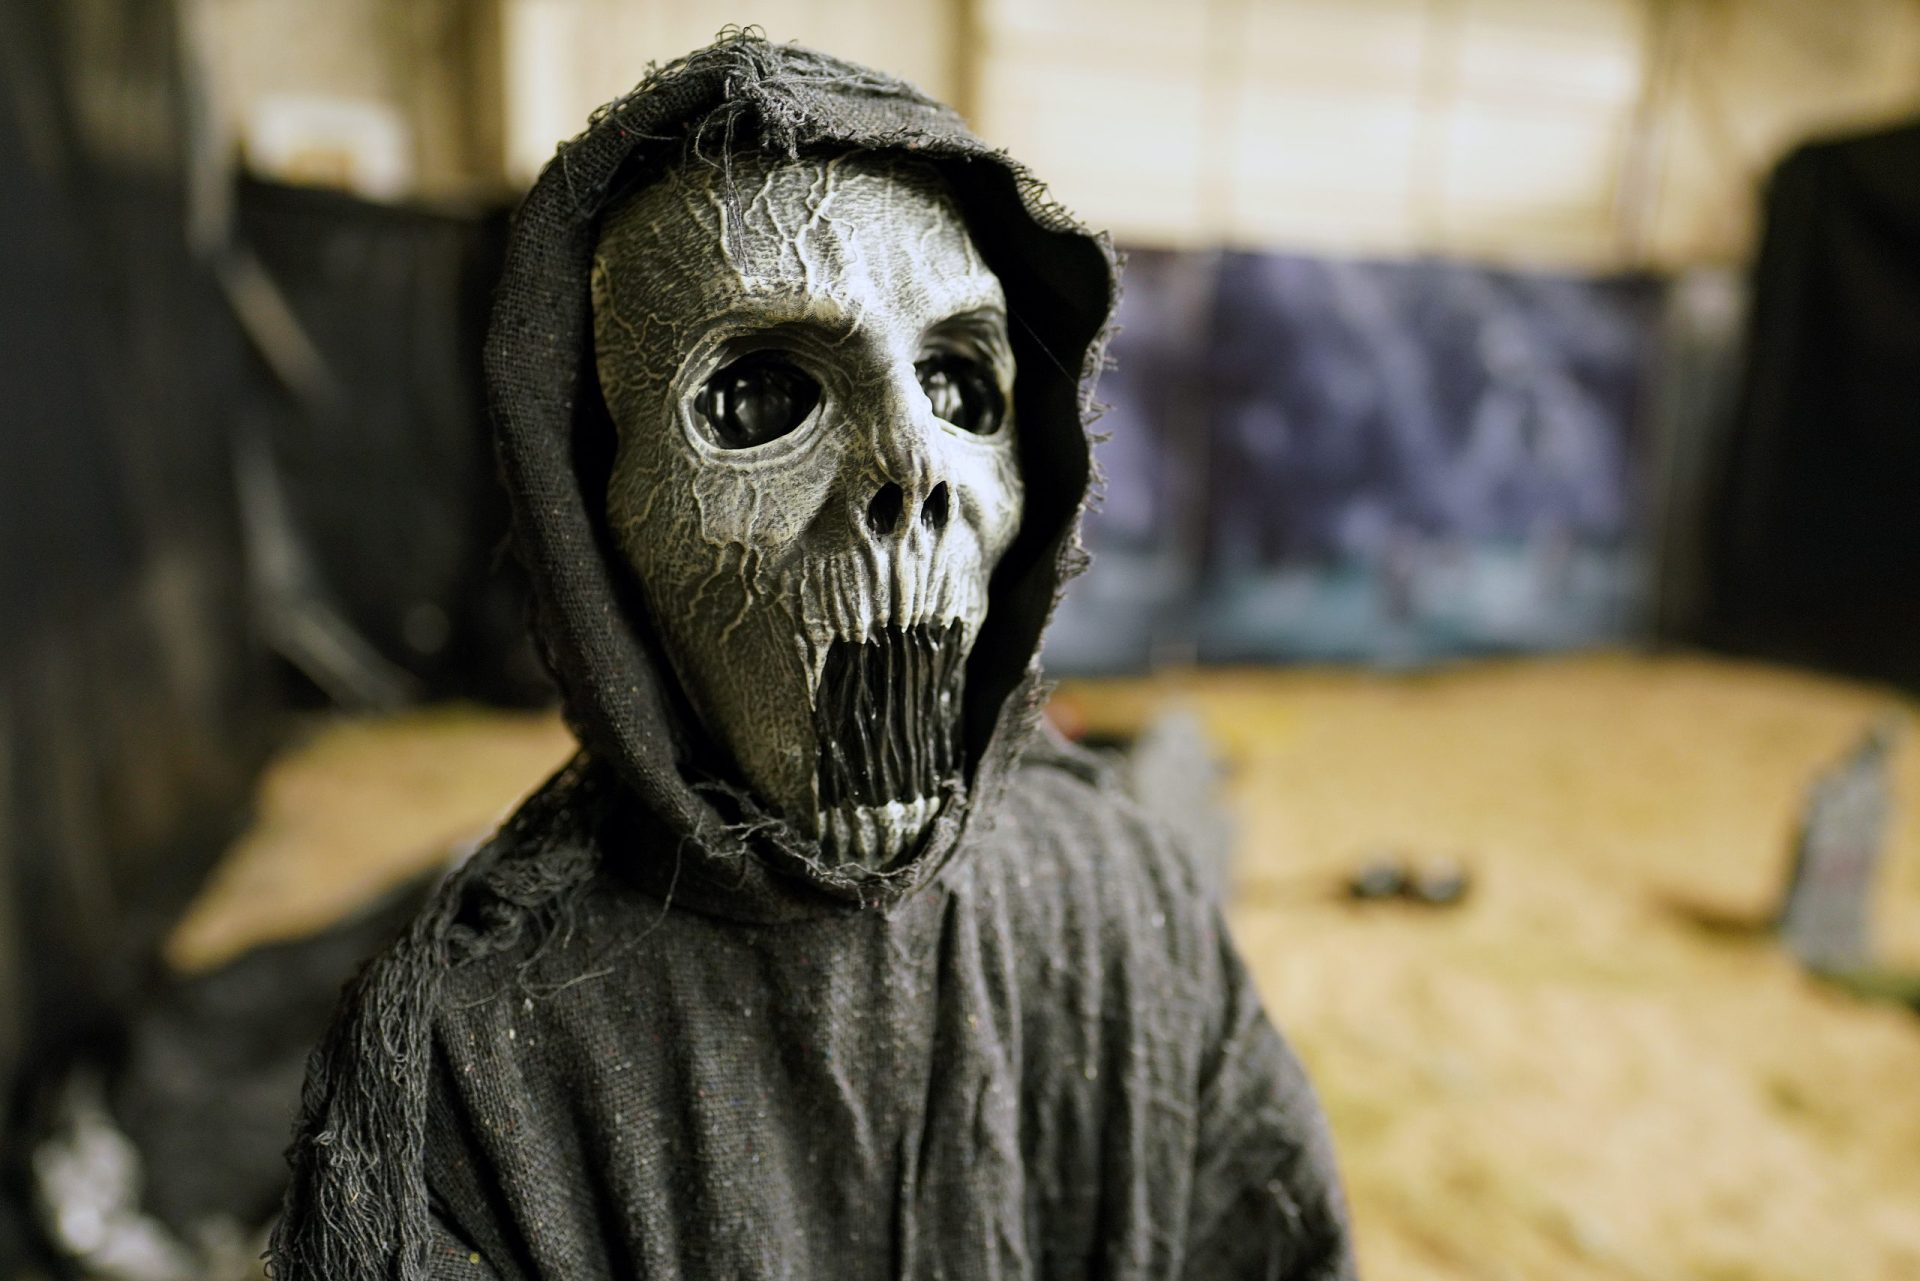 A scary spectacle is on display in the Terror on Texas Avenue haunted house at the livestock show grounds Wednesday, Oct. 12, 2022, in Mercedes. (Joel Martinez | jmartinez@themonitor.com)